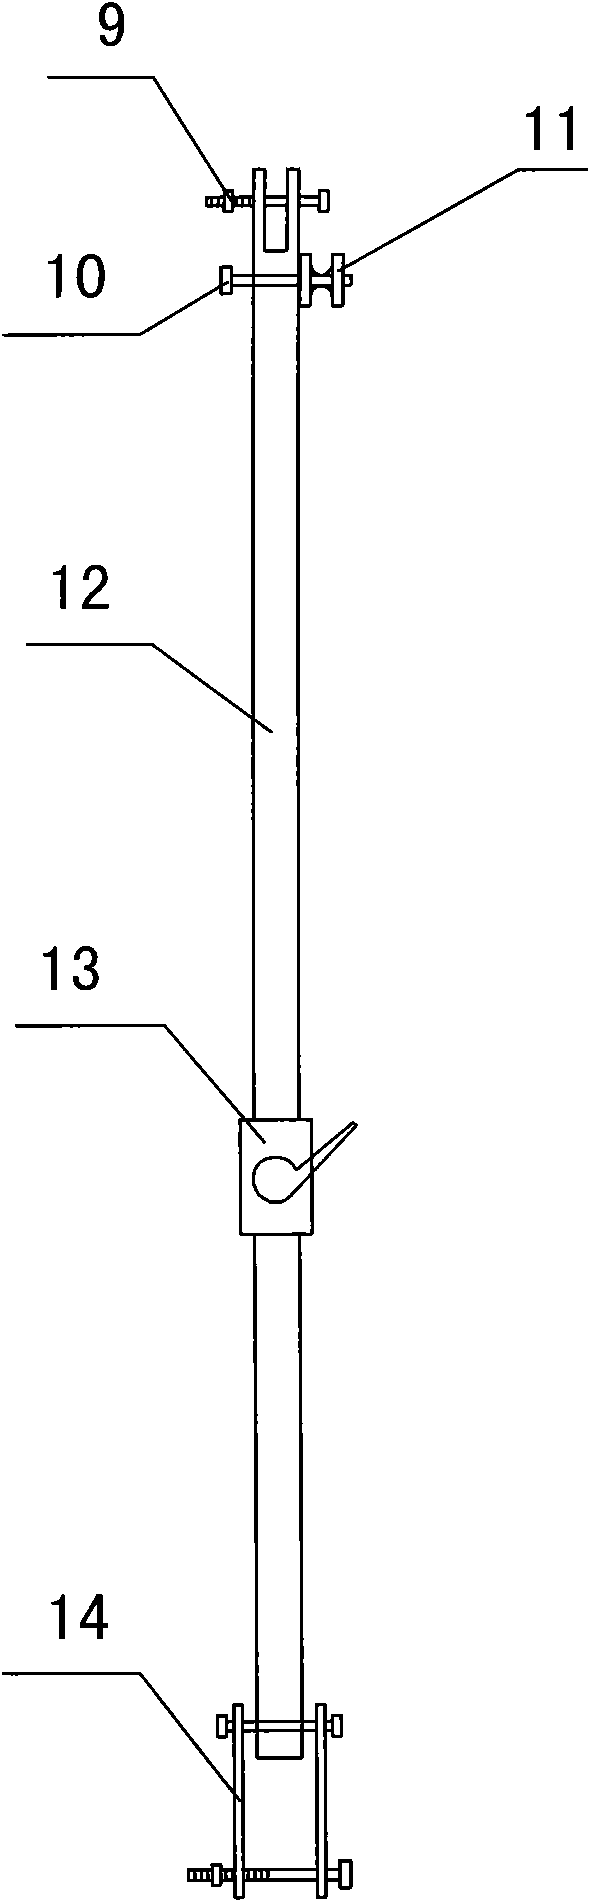 On-load tapping switch hanger